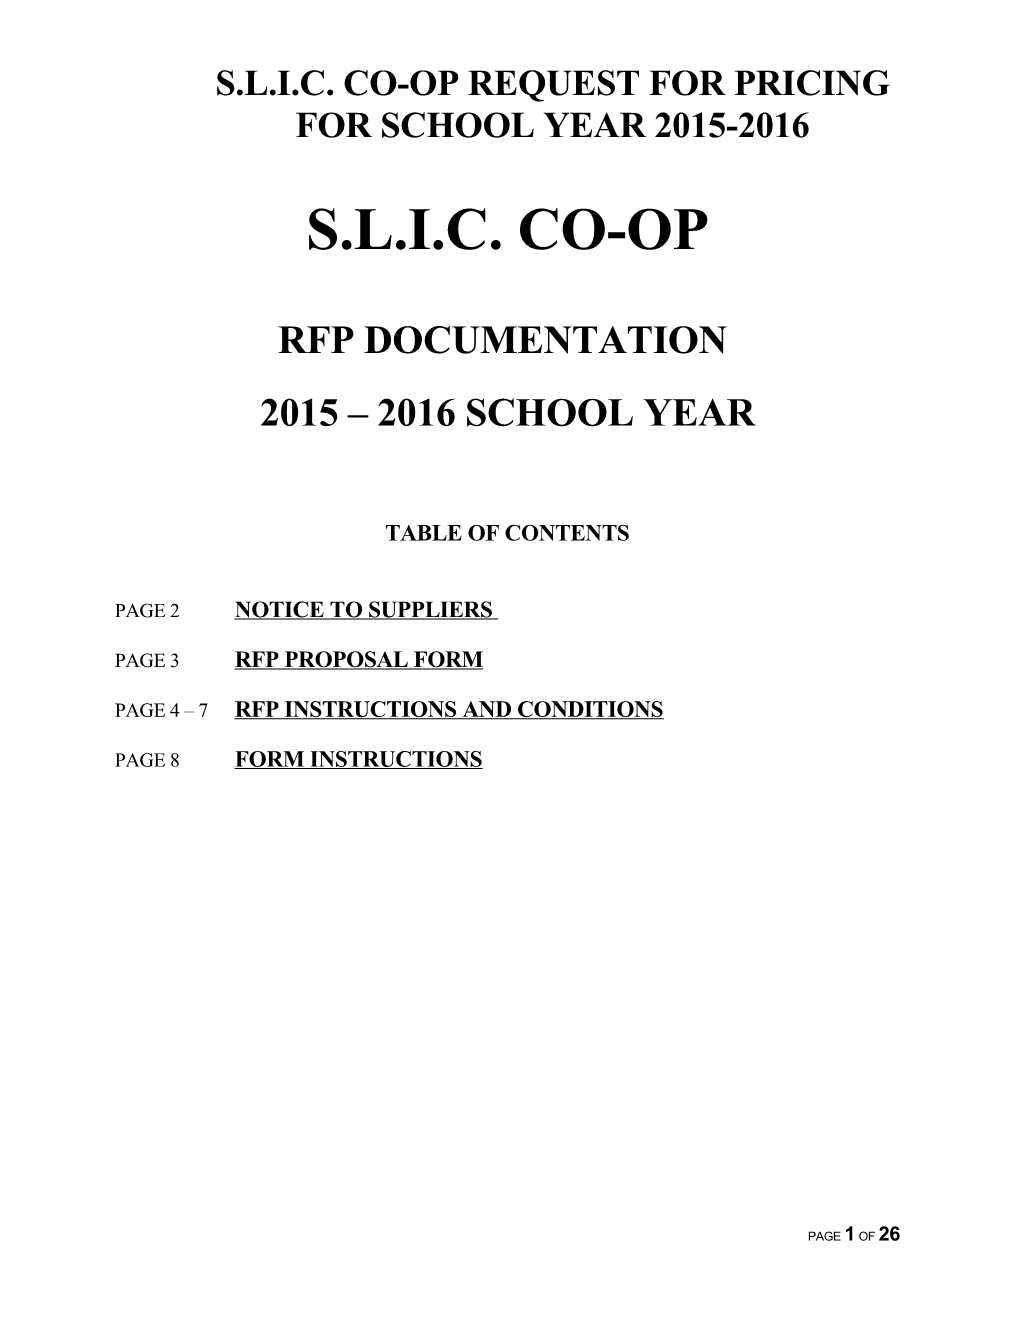 S.L.I.C. Co-Op Request for Pricing for School Year 2015-2016